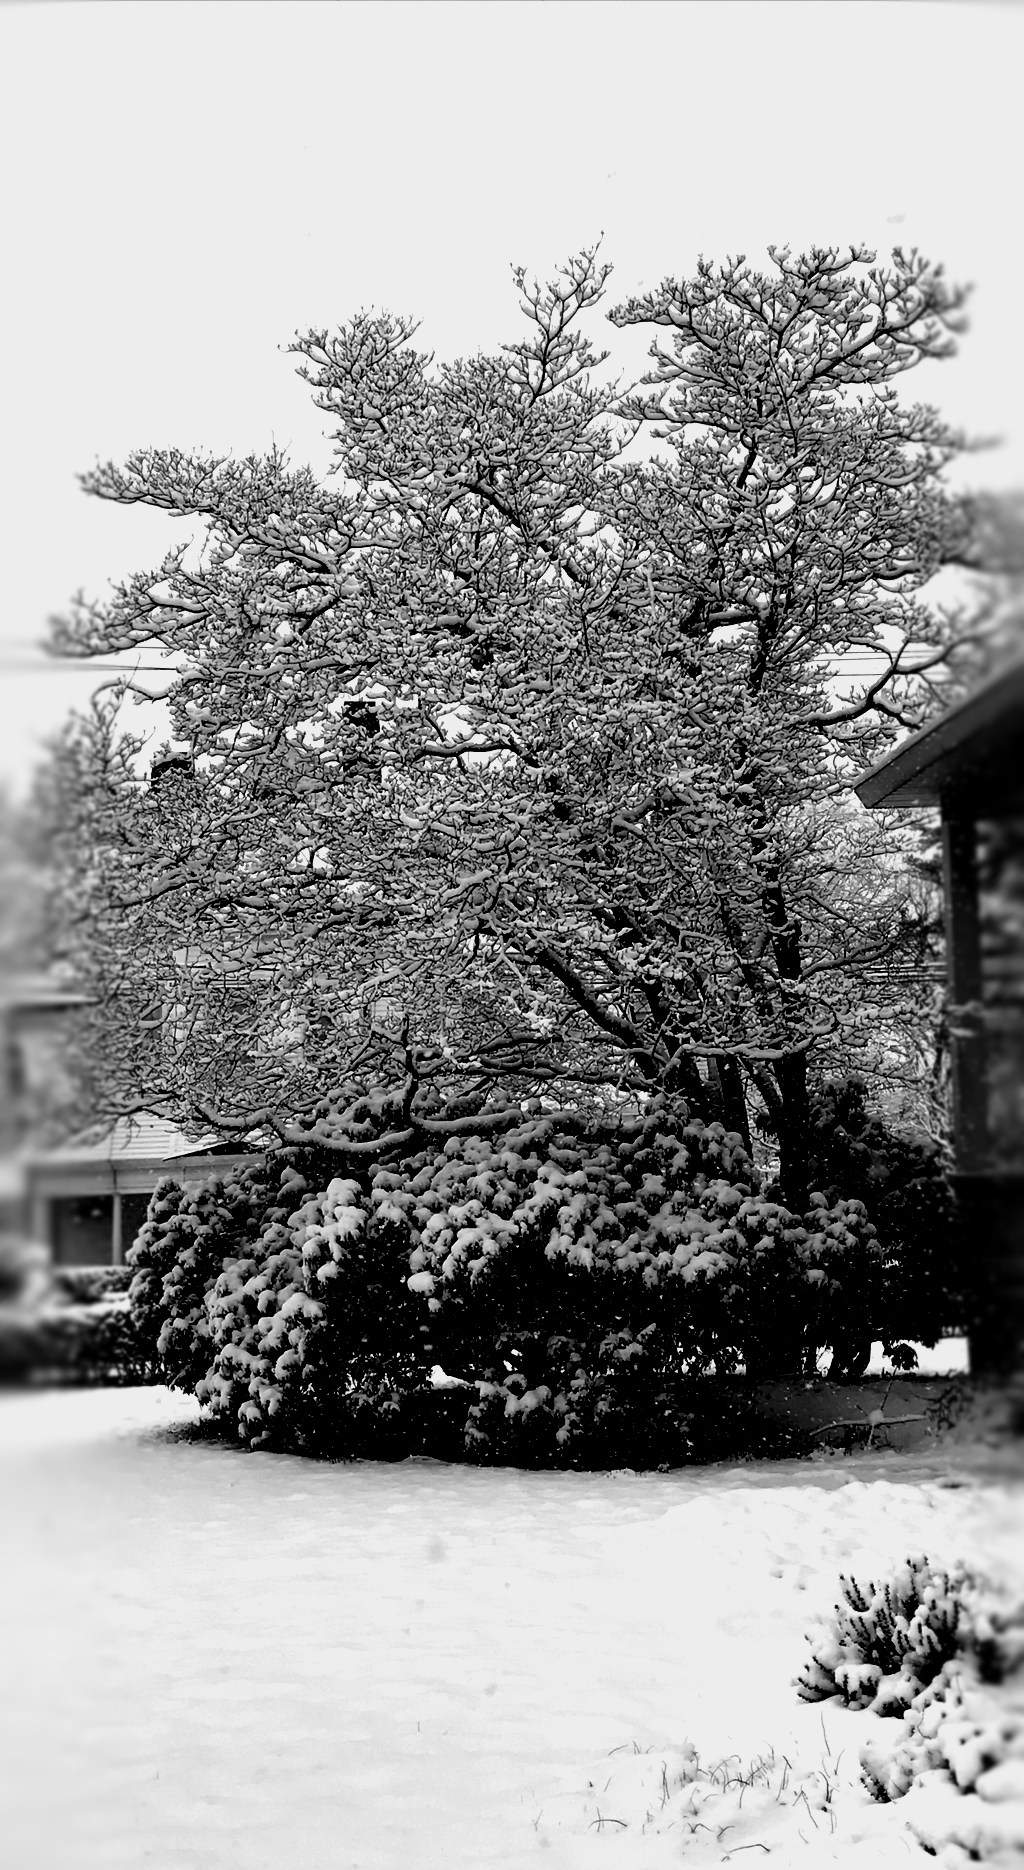 dogwood tree covered in snow